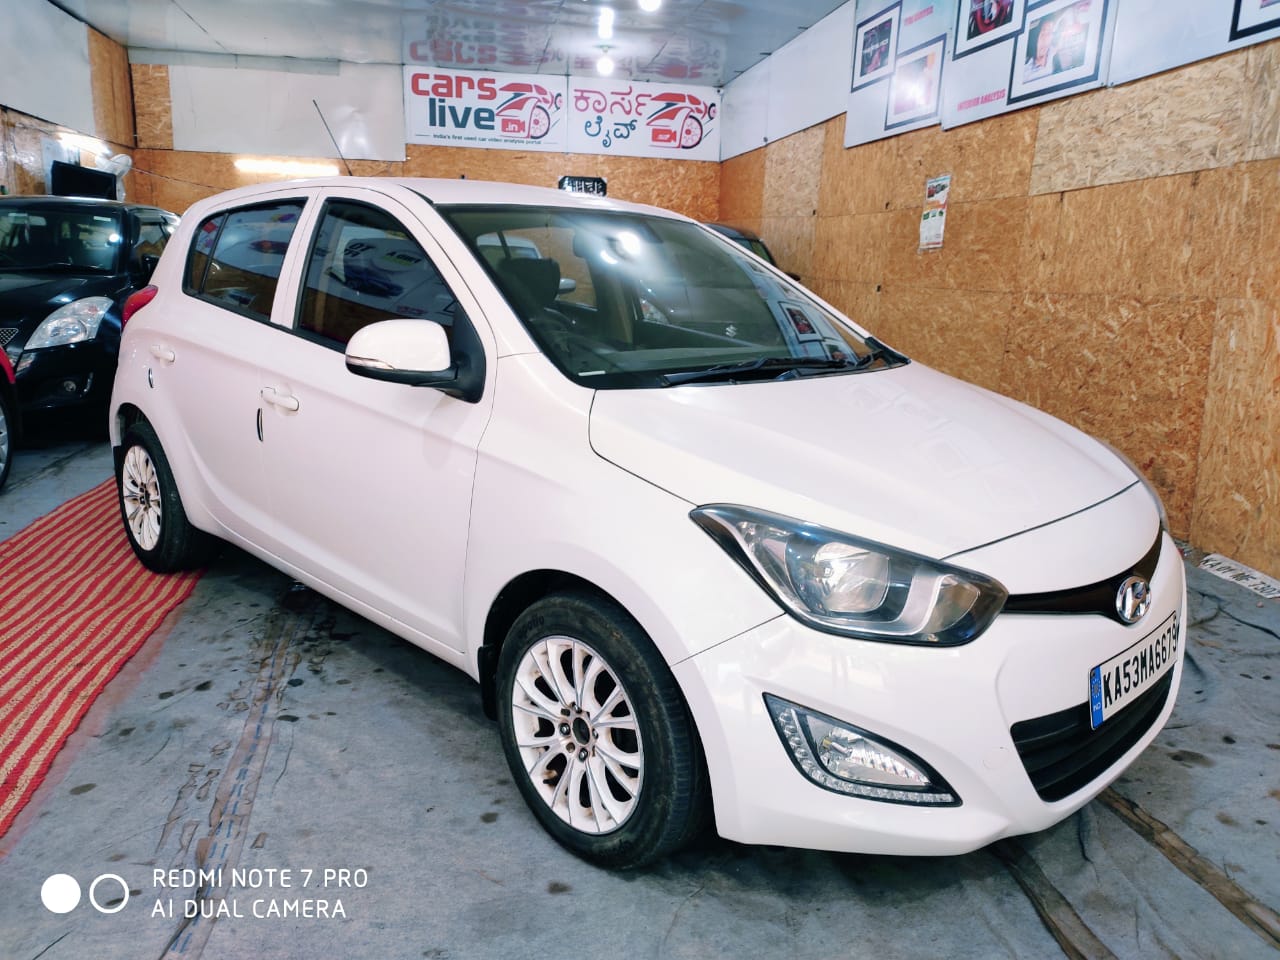 2013 Hyundai i20 Facelift Unveiled  Details and Pictures